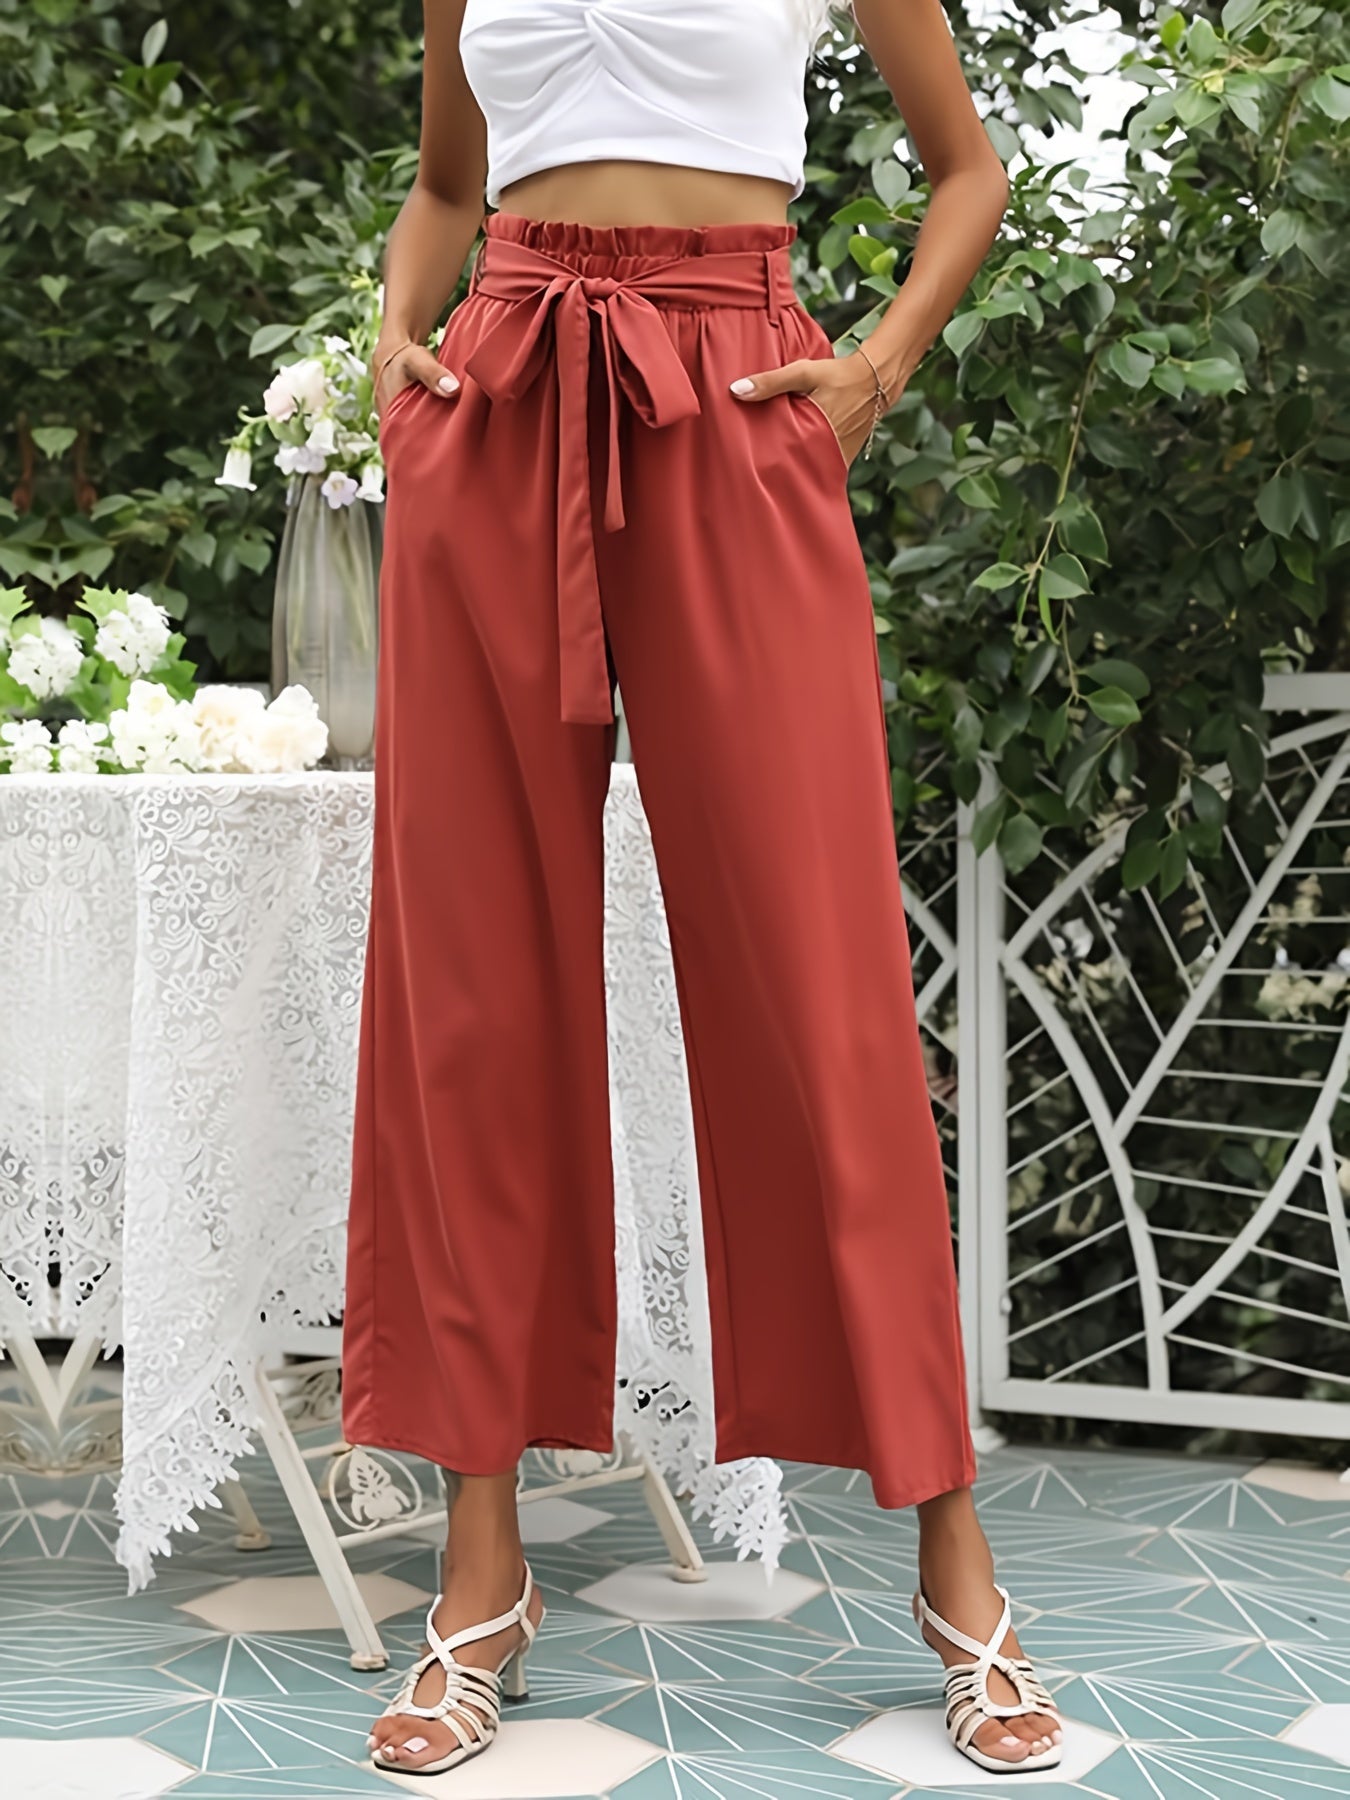 vlovelaw  Boho Smocked Wide Leg Pants, Casual High Waist Tie Front Solid Palazzo Pants, Women's Clothing